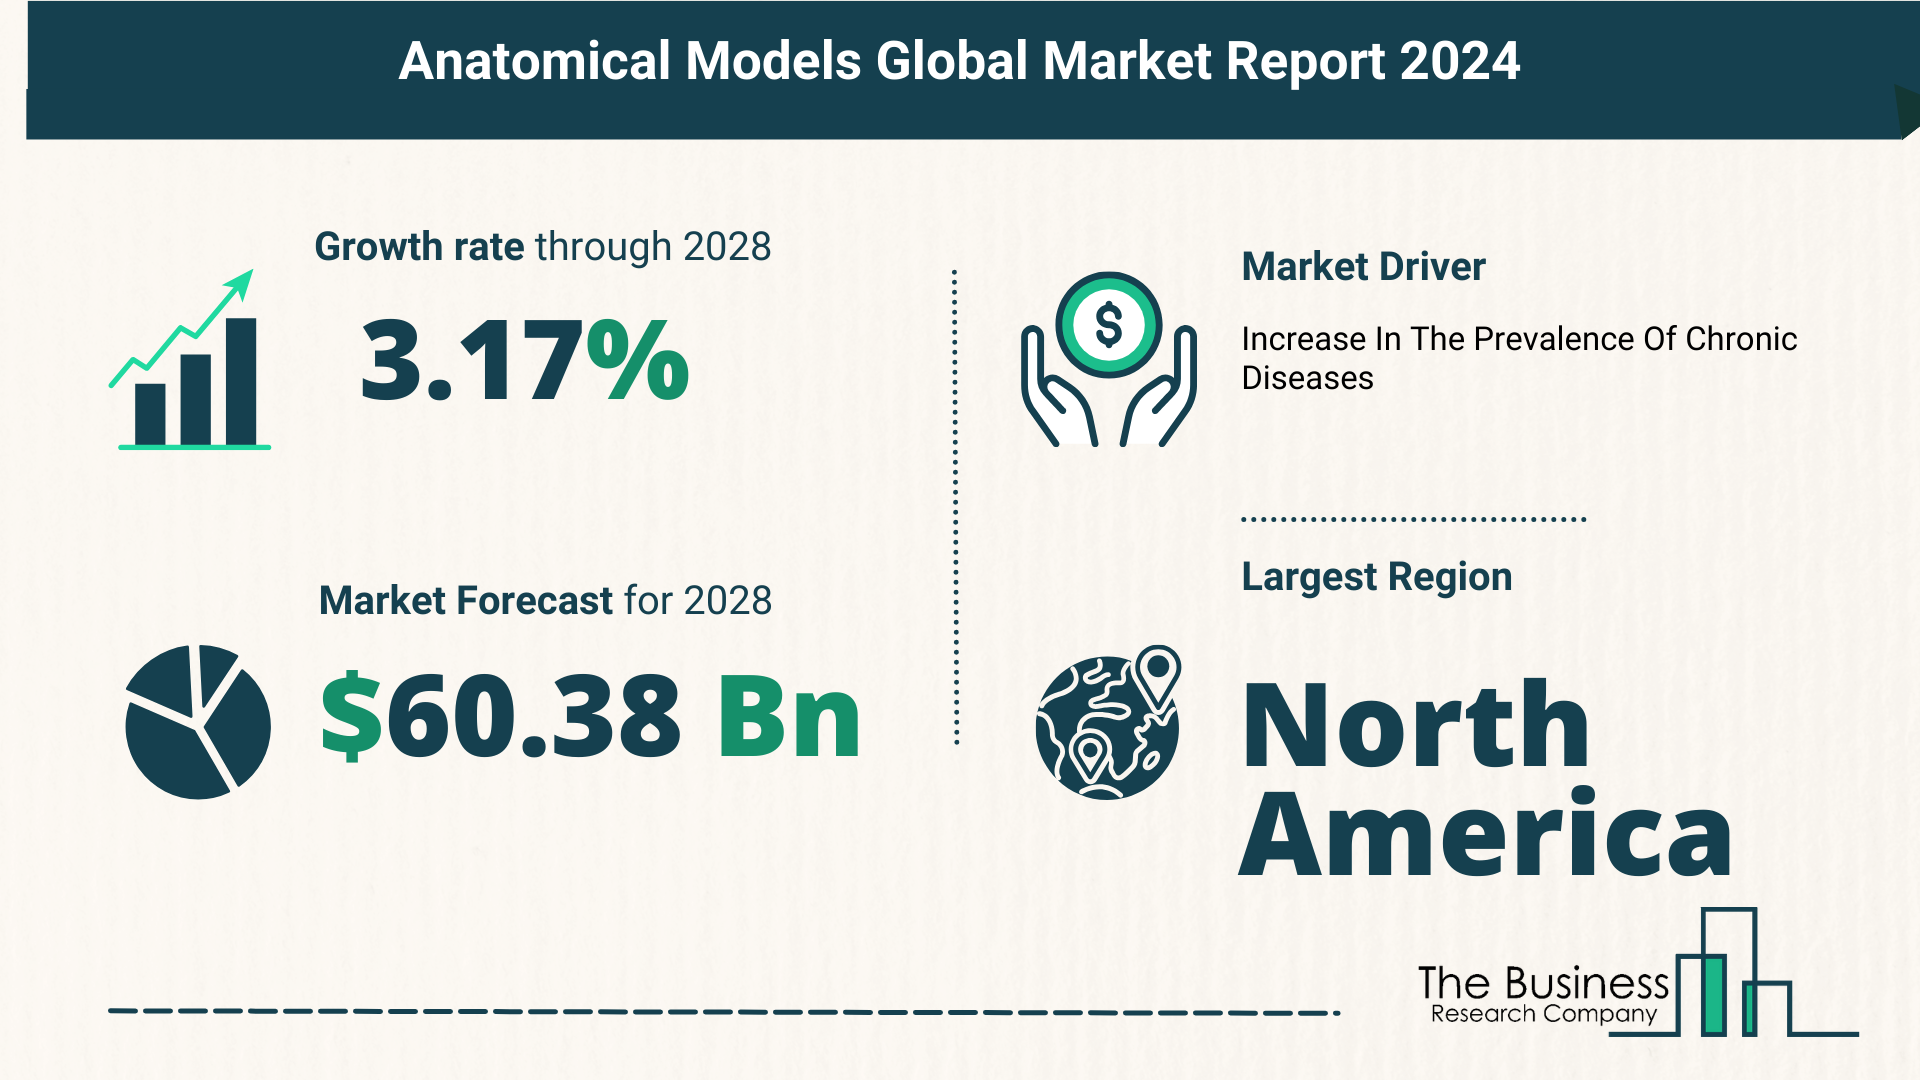 Key Takeaways From The Global Anatomical Models Market Forecast 2024